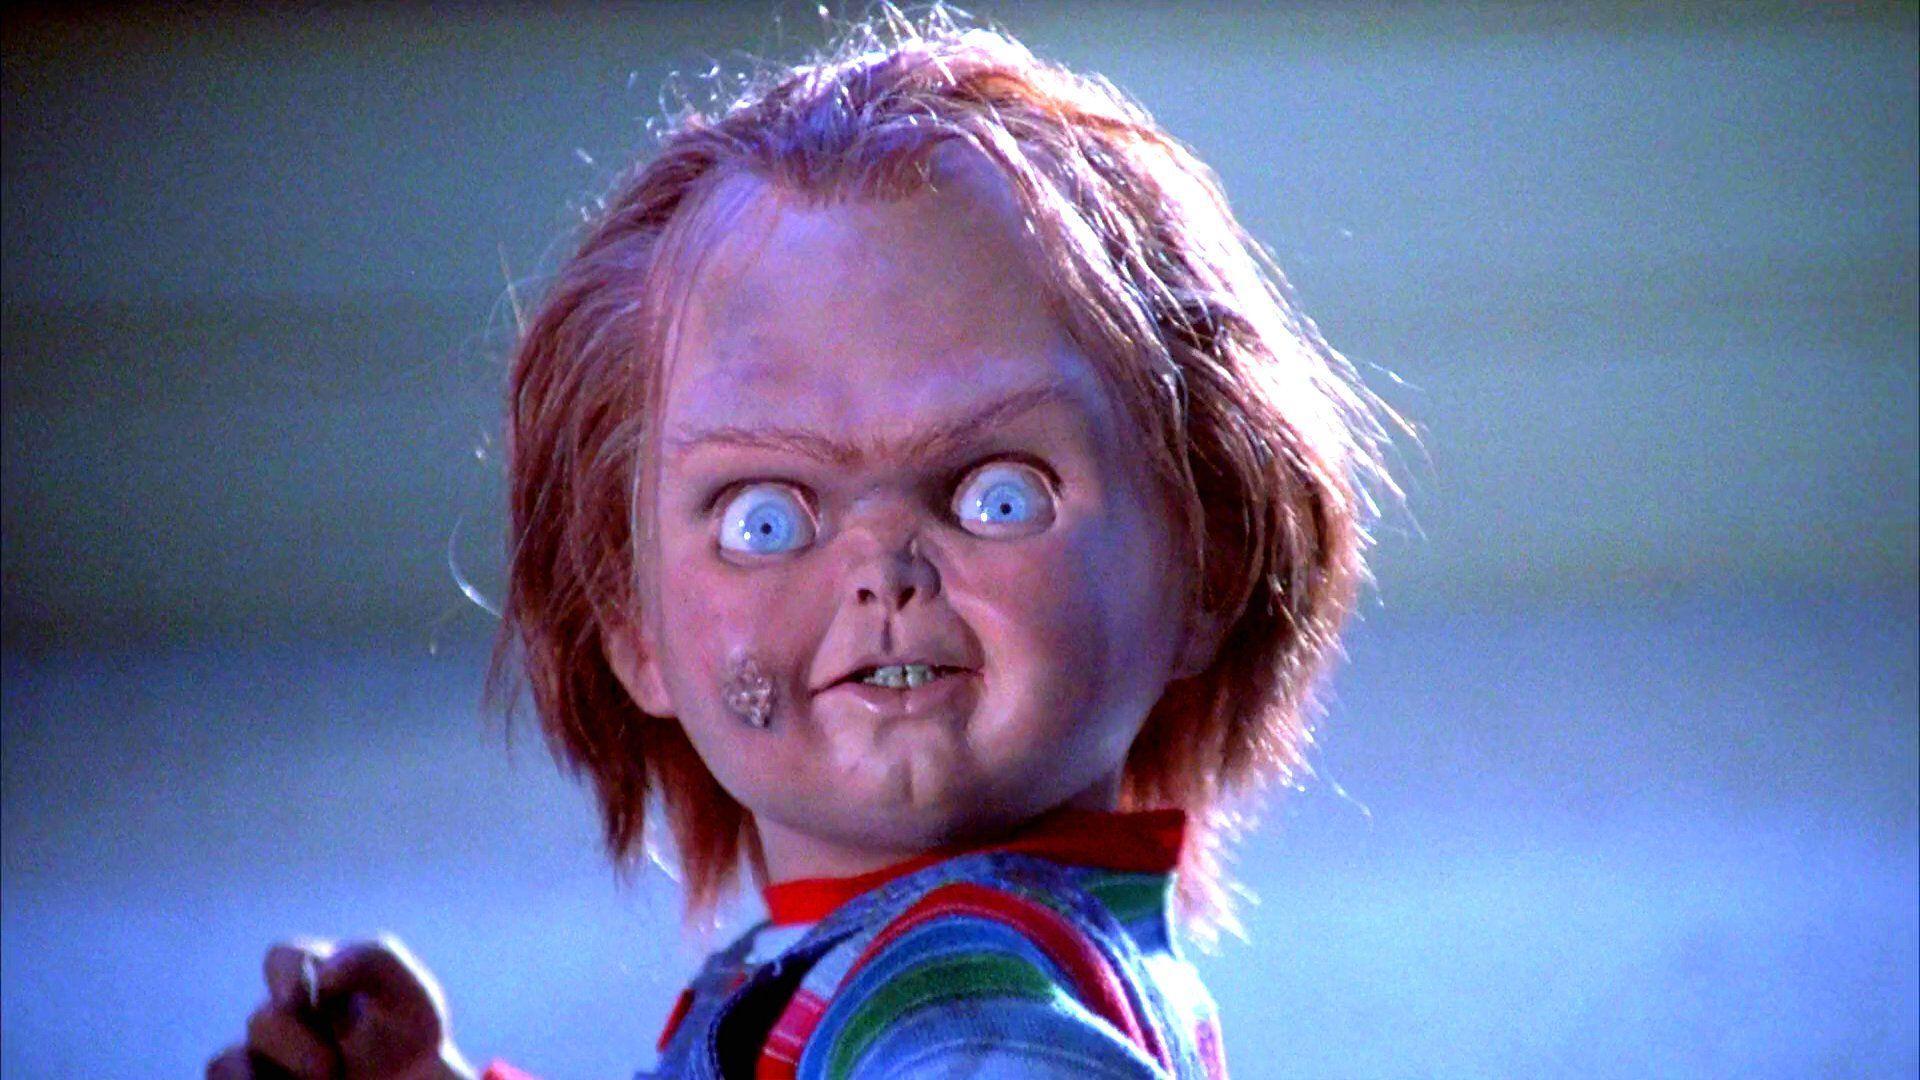 Child's Play: Chucky Plays With Prey In Murderous Montage